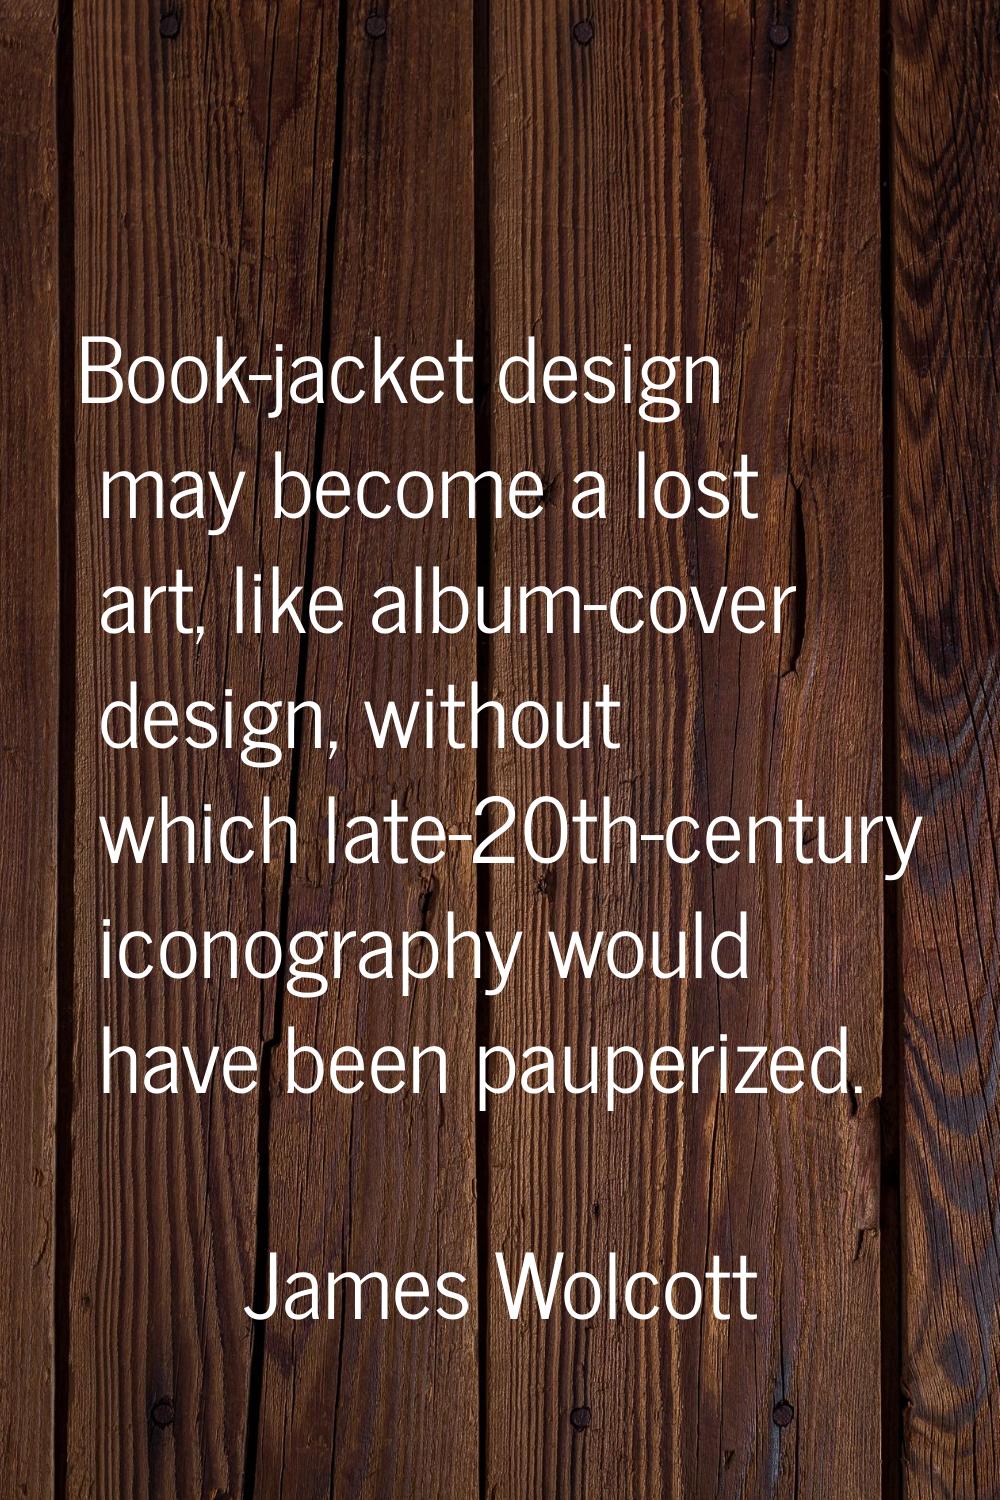 Book-jacket design may become a lost art, like album-cover design, without which late-20th-century 